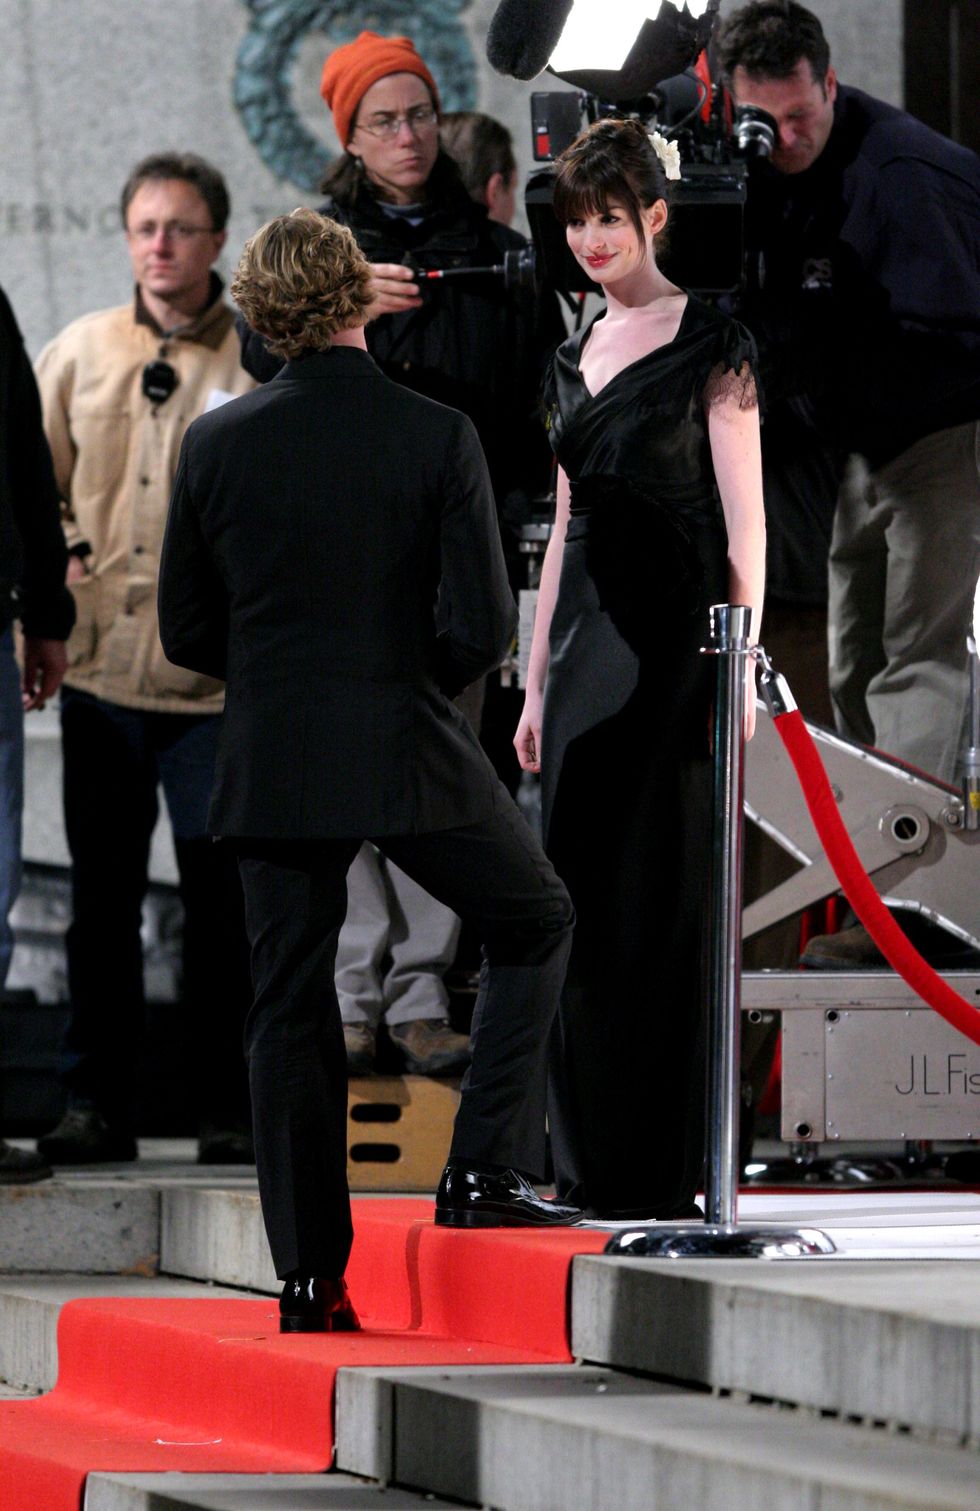 Anne Hathaway filming "The Devil Wears Prada" at the Museum of Natural History in New York City, October 2005